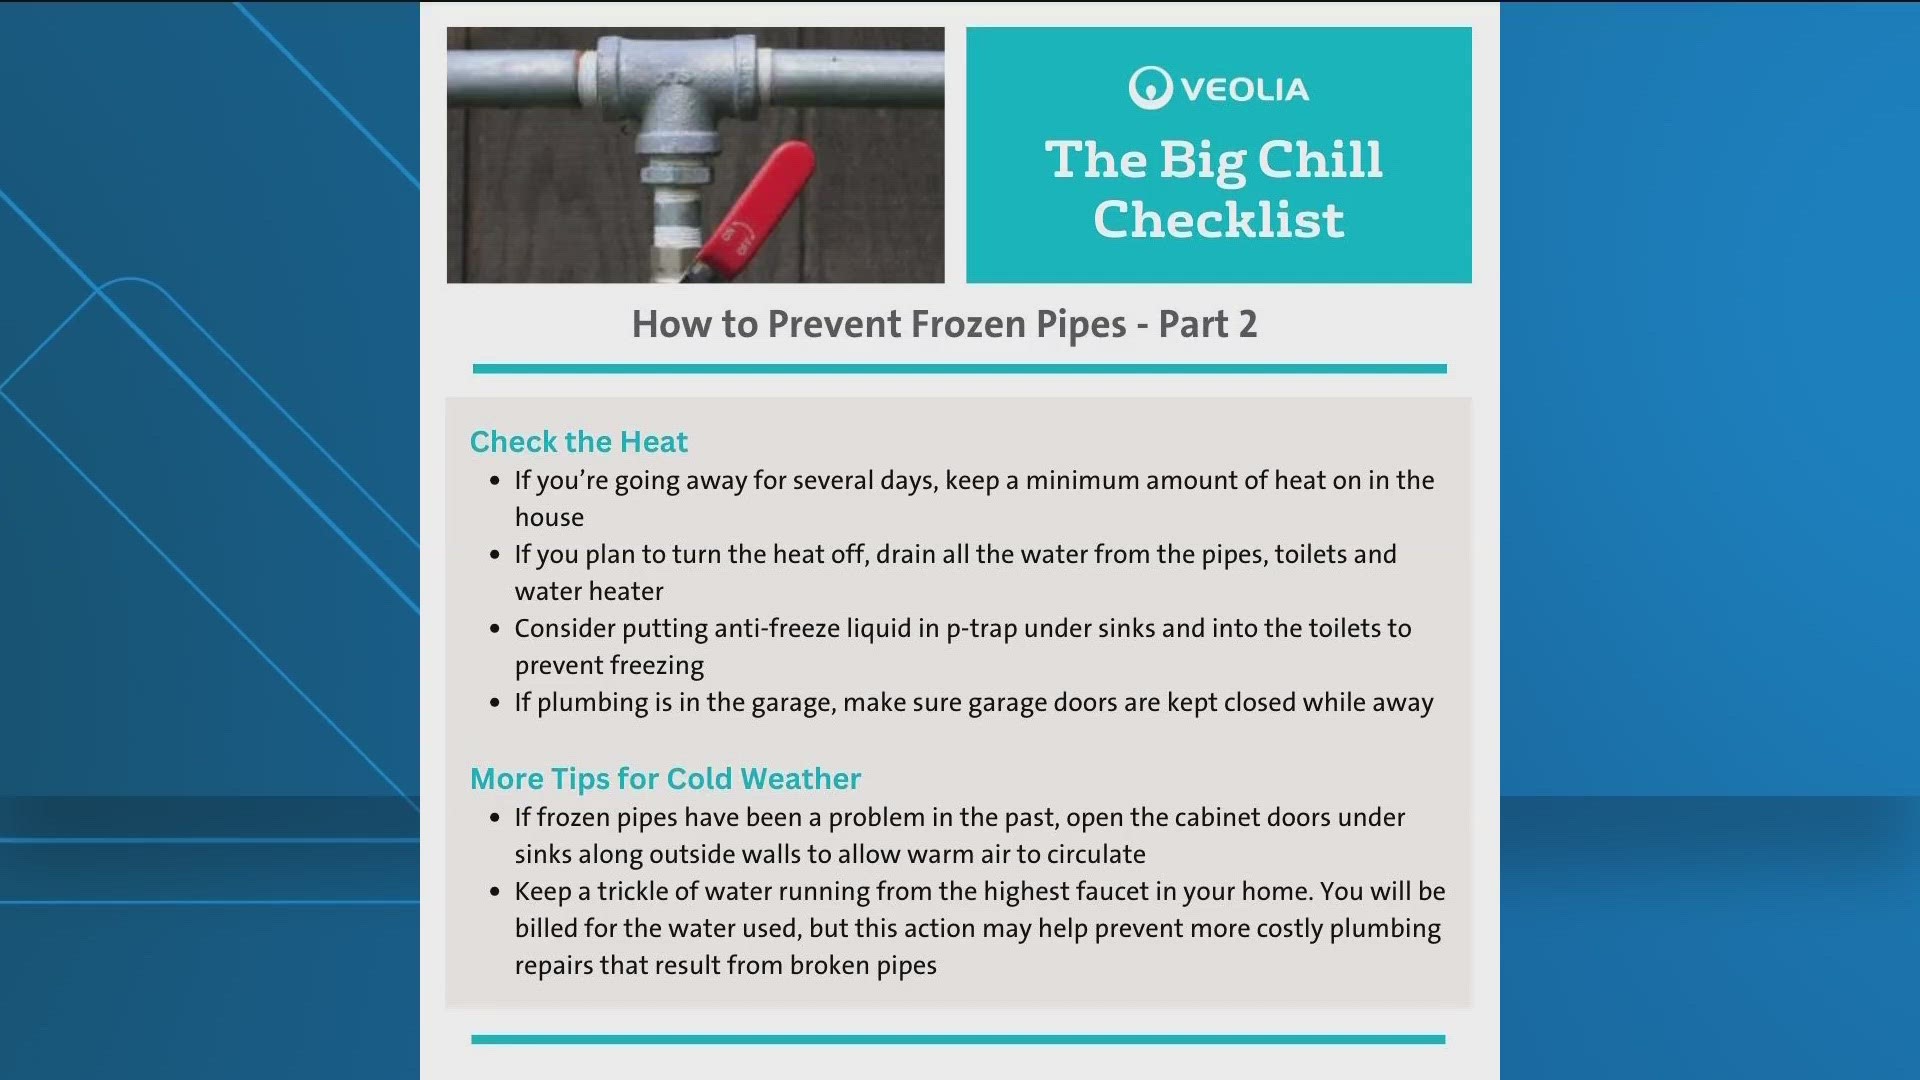 The water provider has a list of tips to keep pipes from freezing in cold snaps.